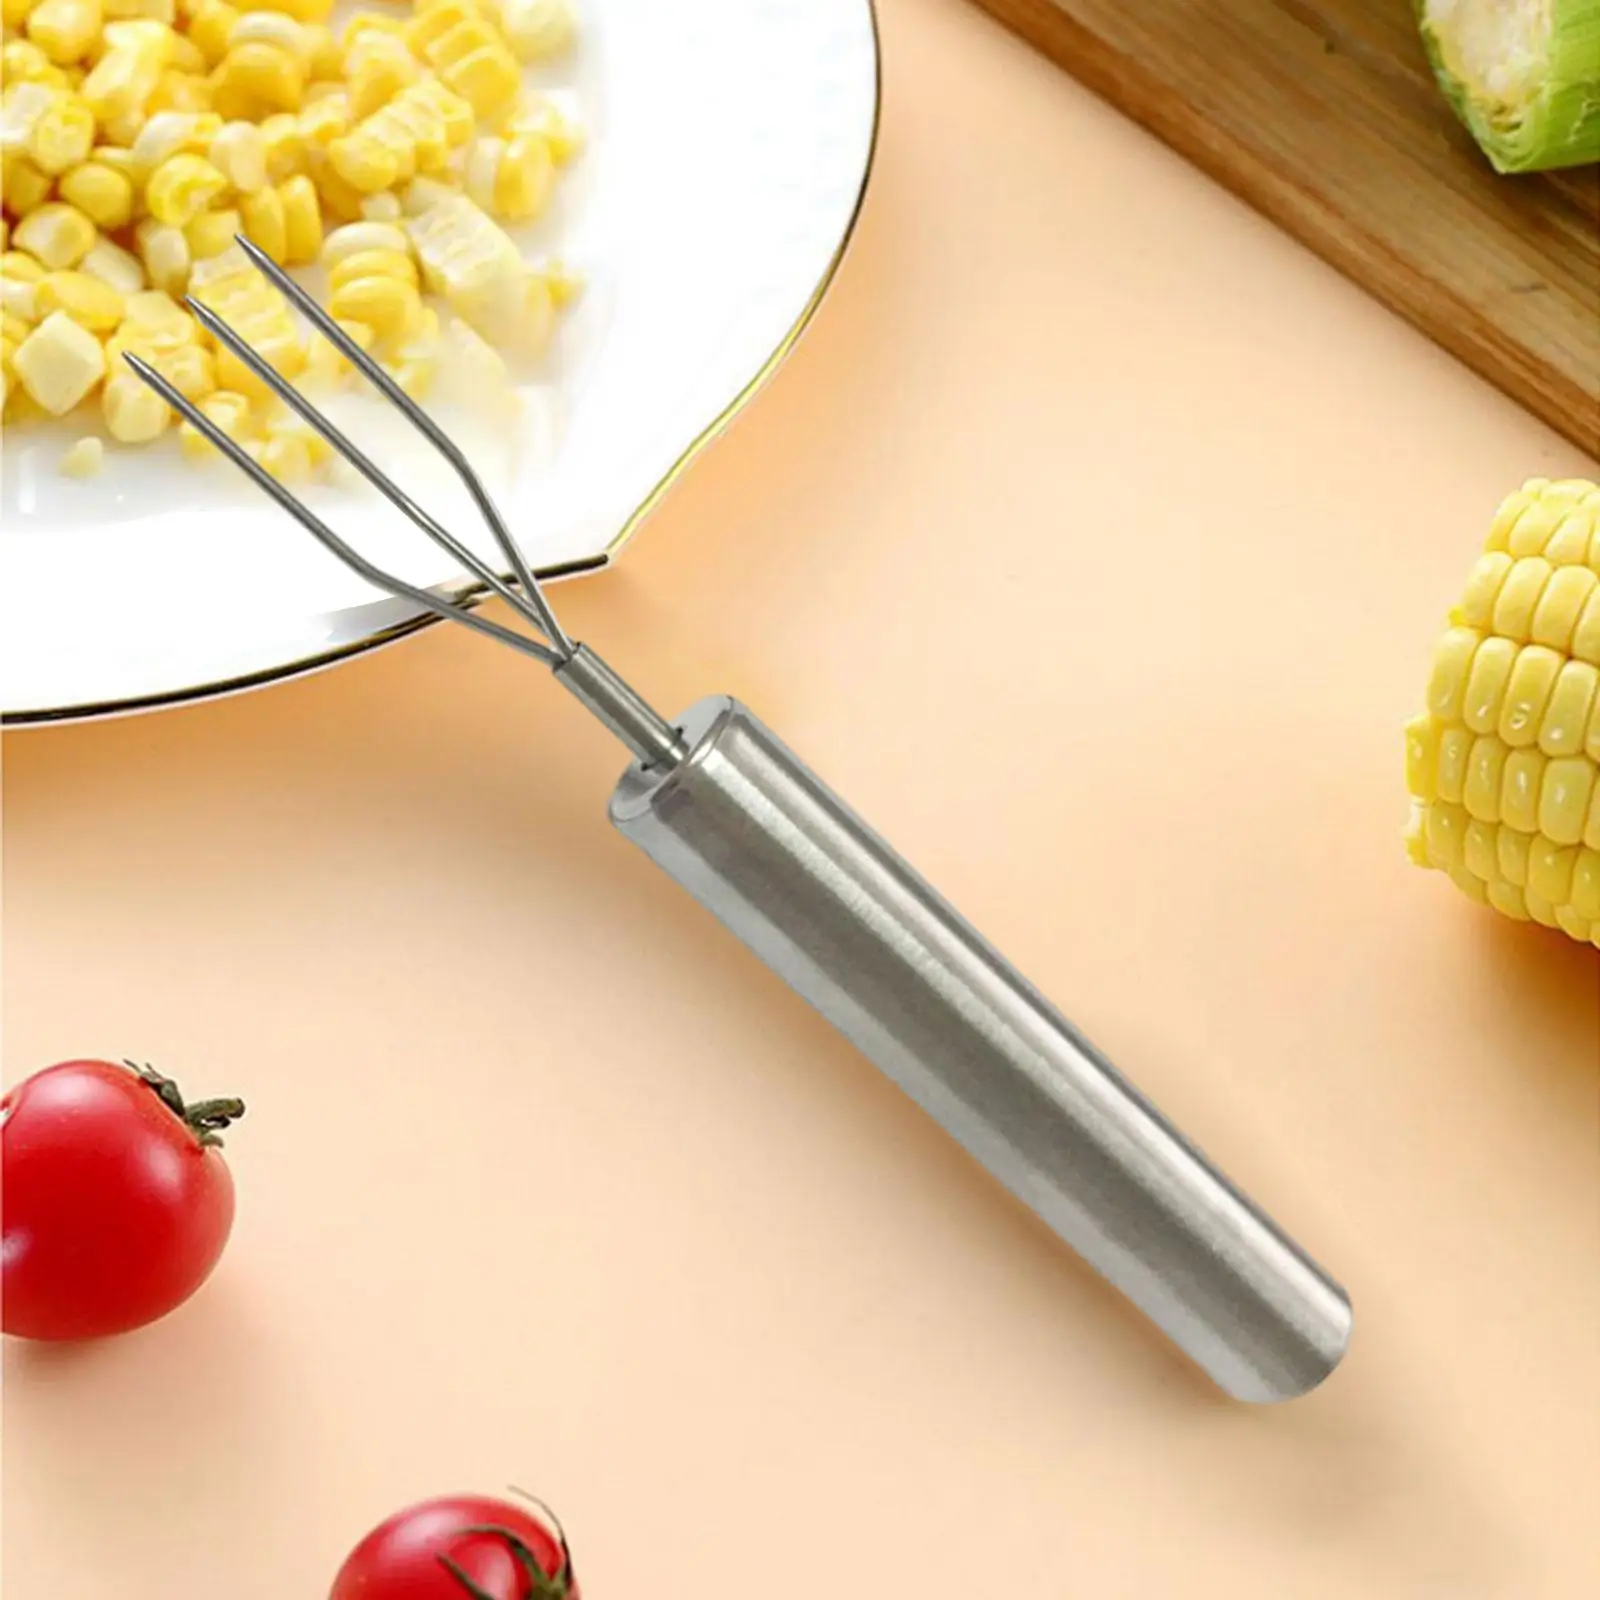 Corn Skewer COB Skewers Grill Accessories Durable with Handle BBQ Tools Potato Fork BBQ Skewer for Parties Home Roasted Meat